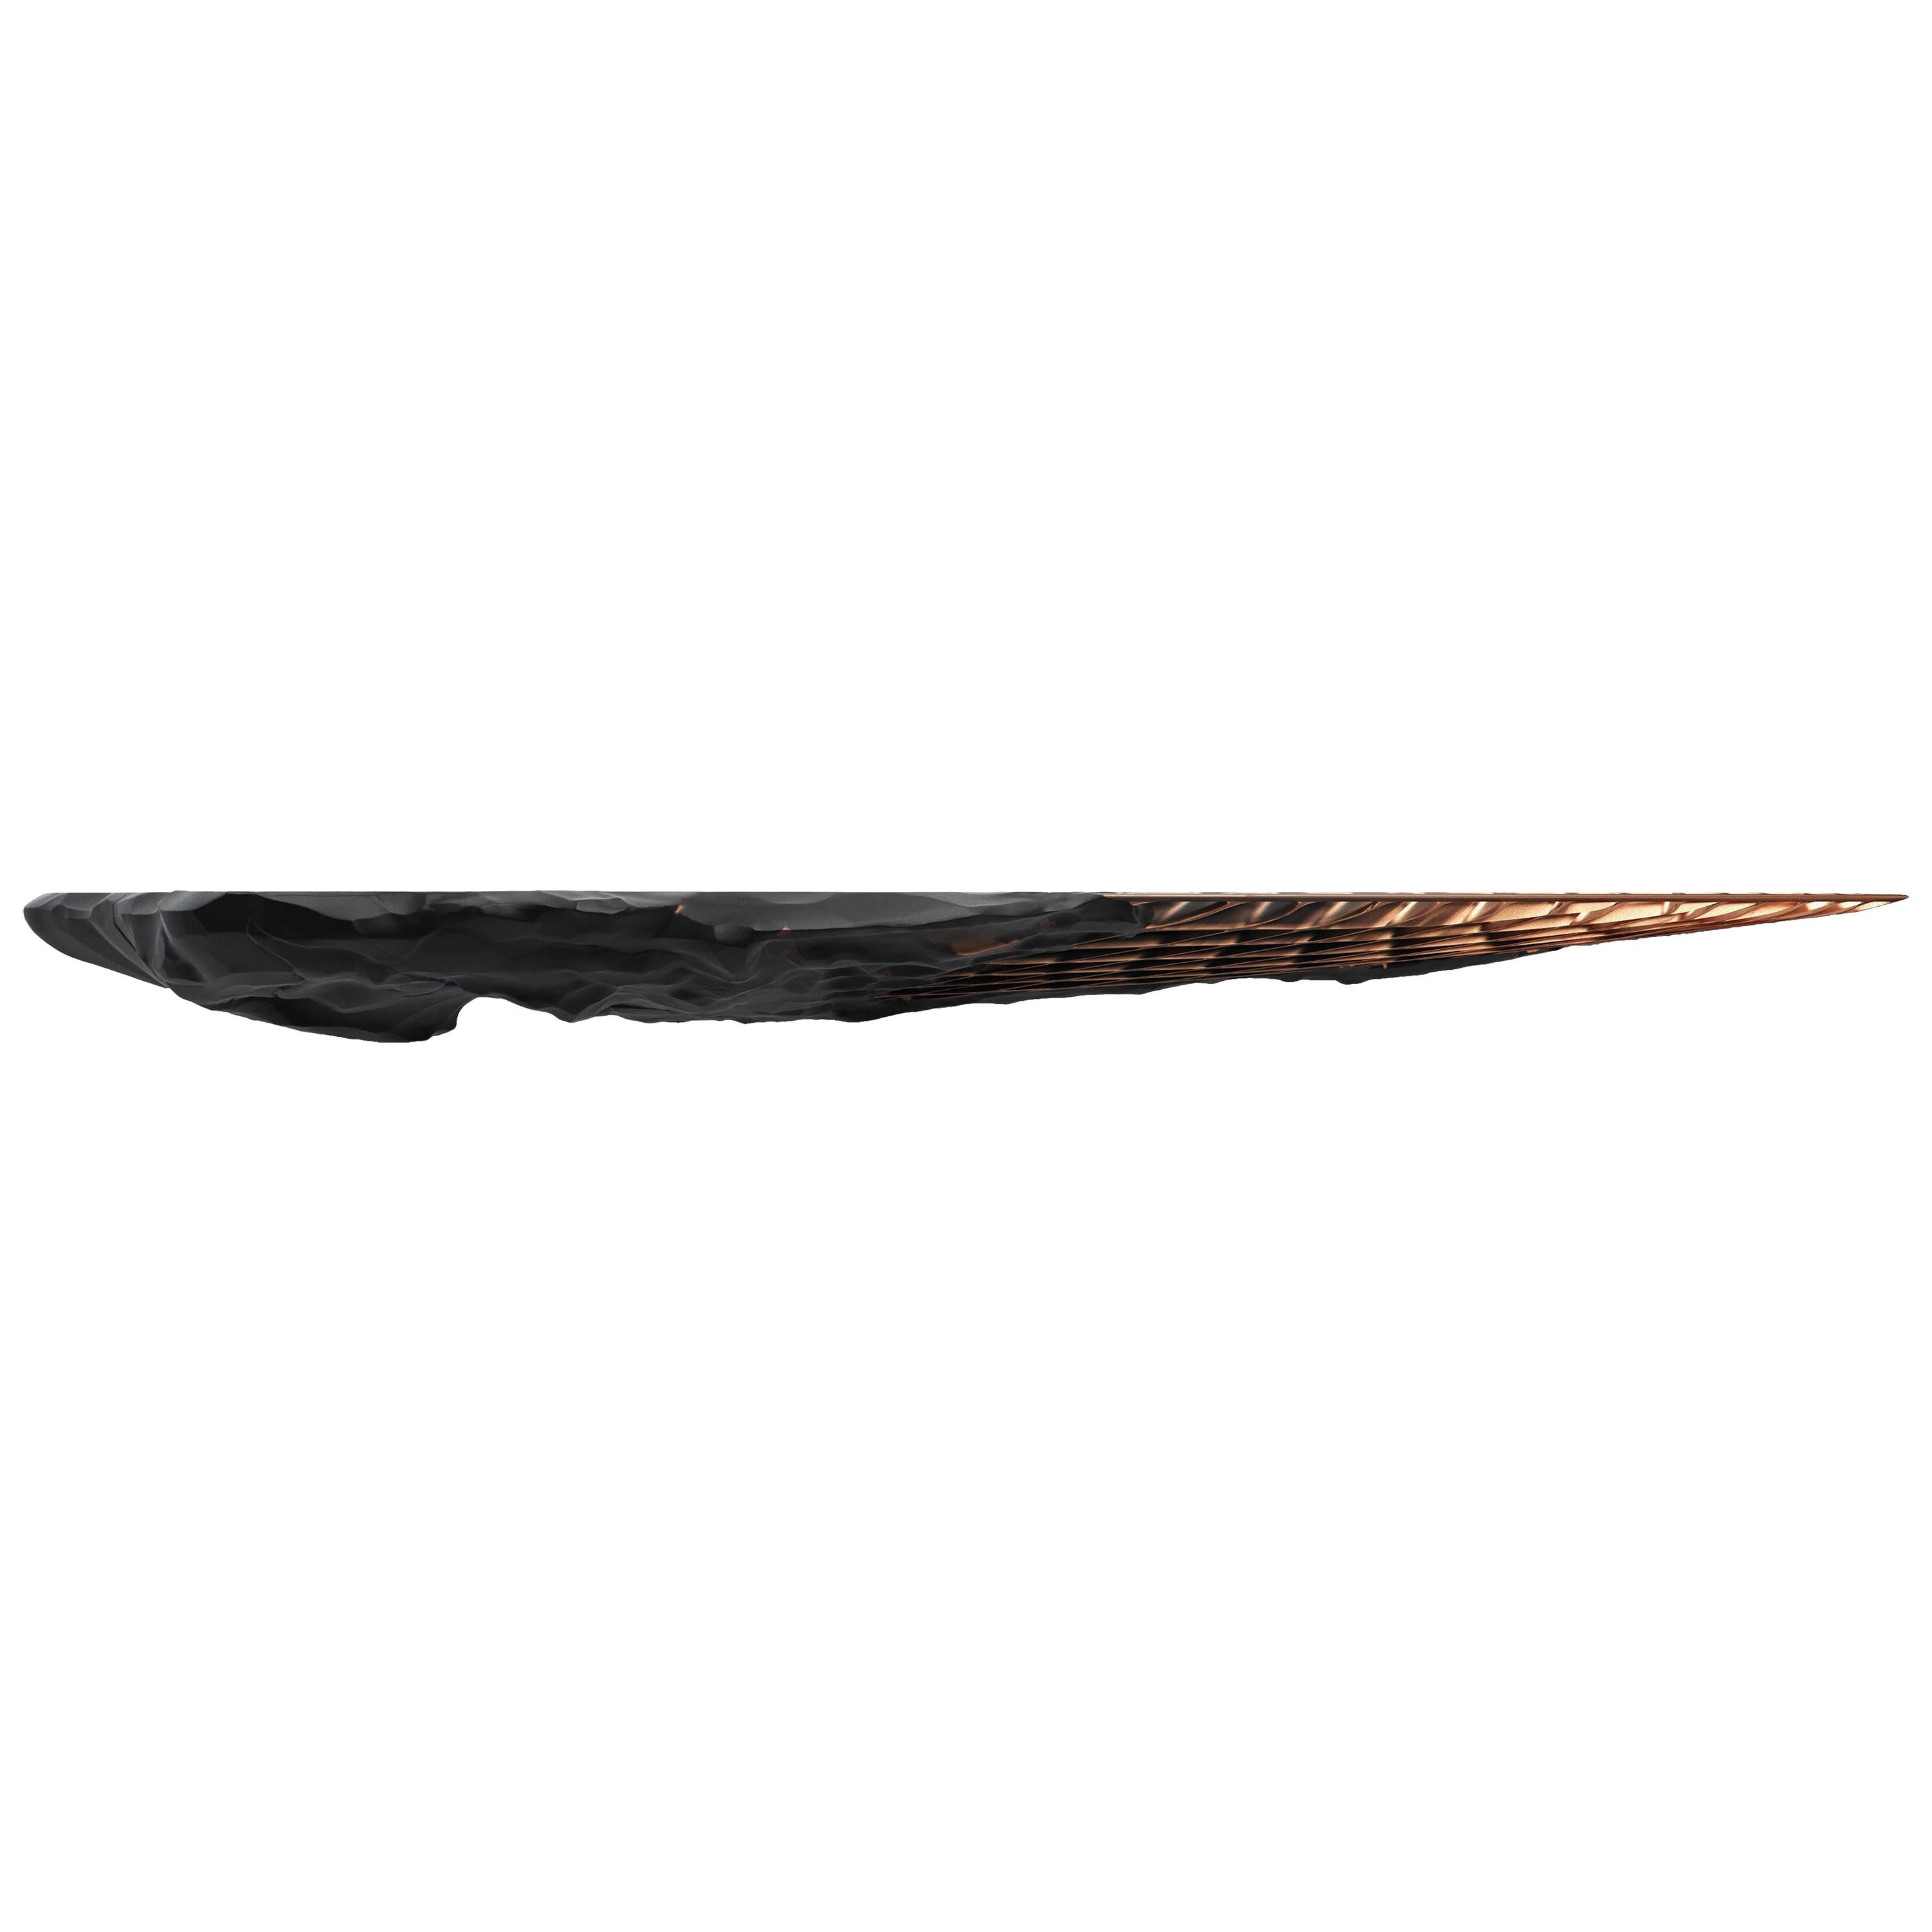 Metsidian Wall Shelf Made in Obsidian with Copper Finish on Top by Janne Kyttane For Sale